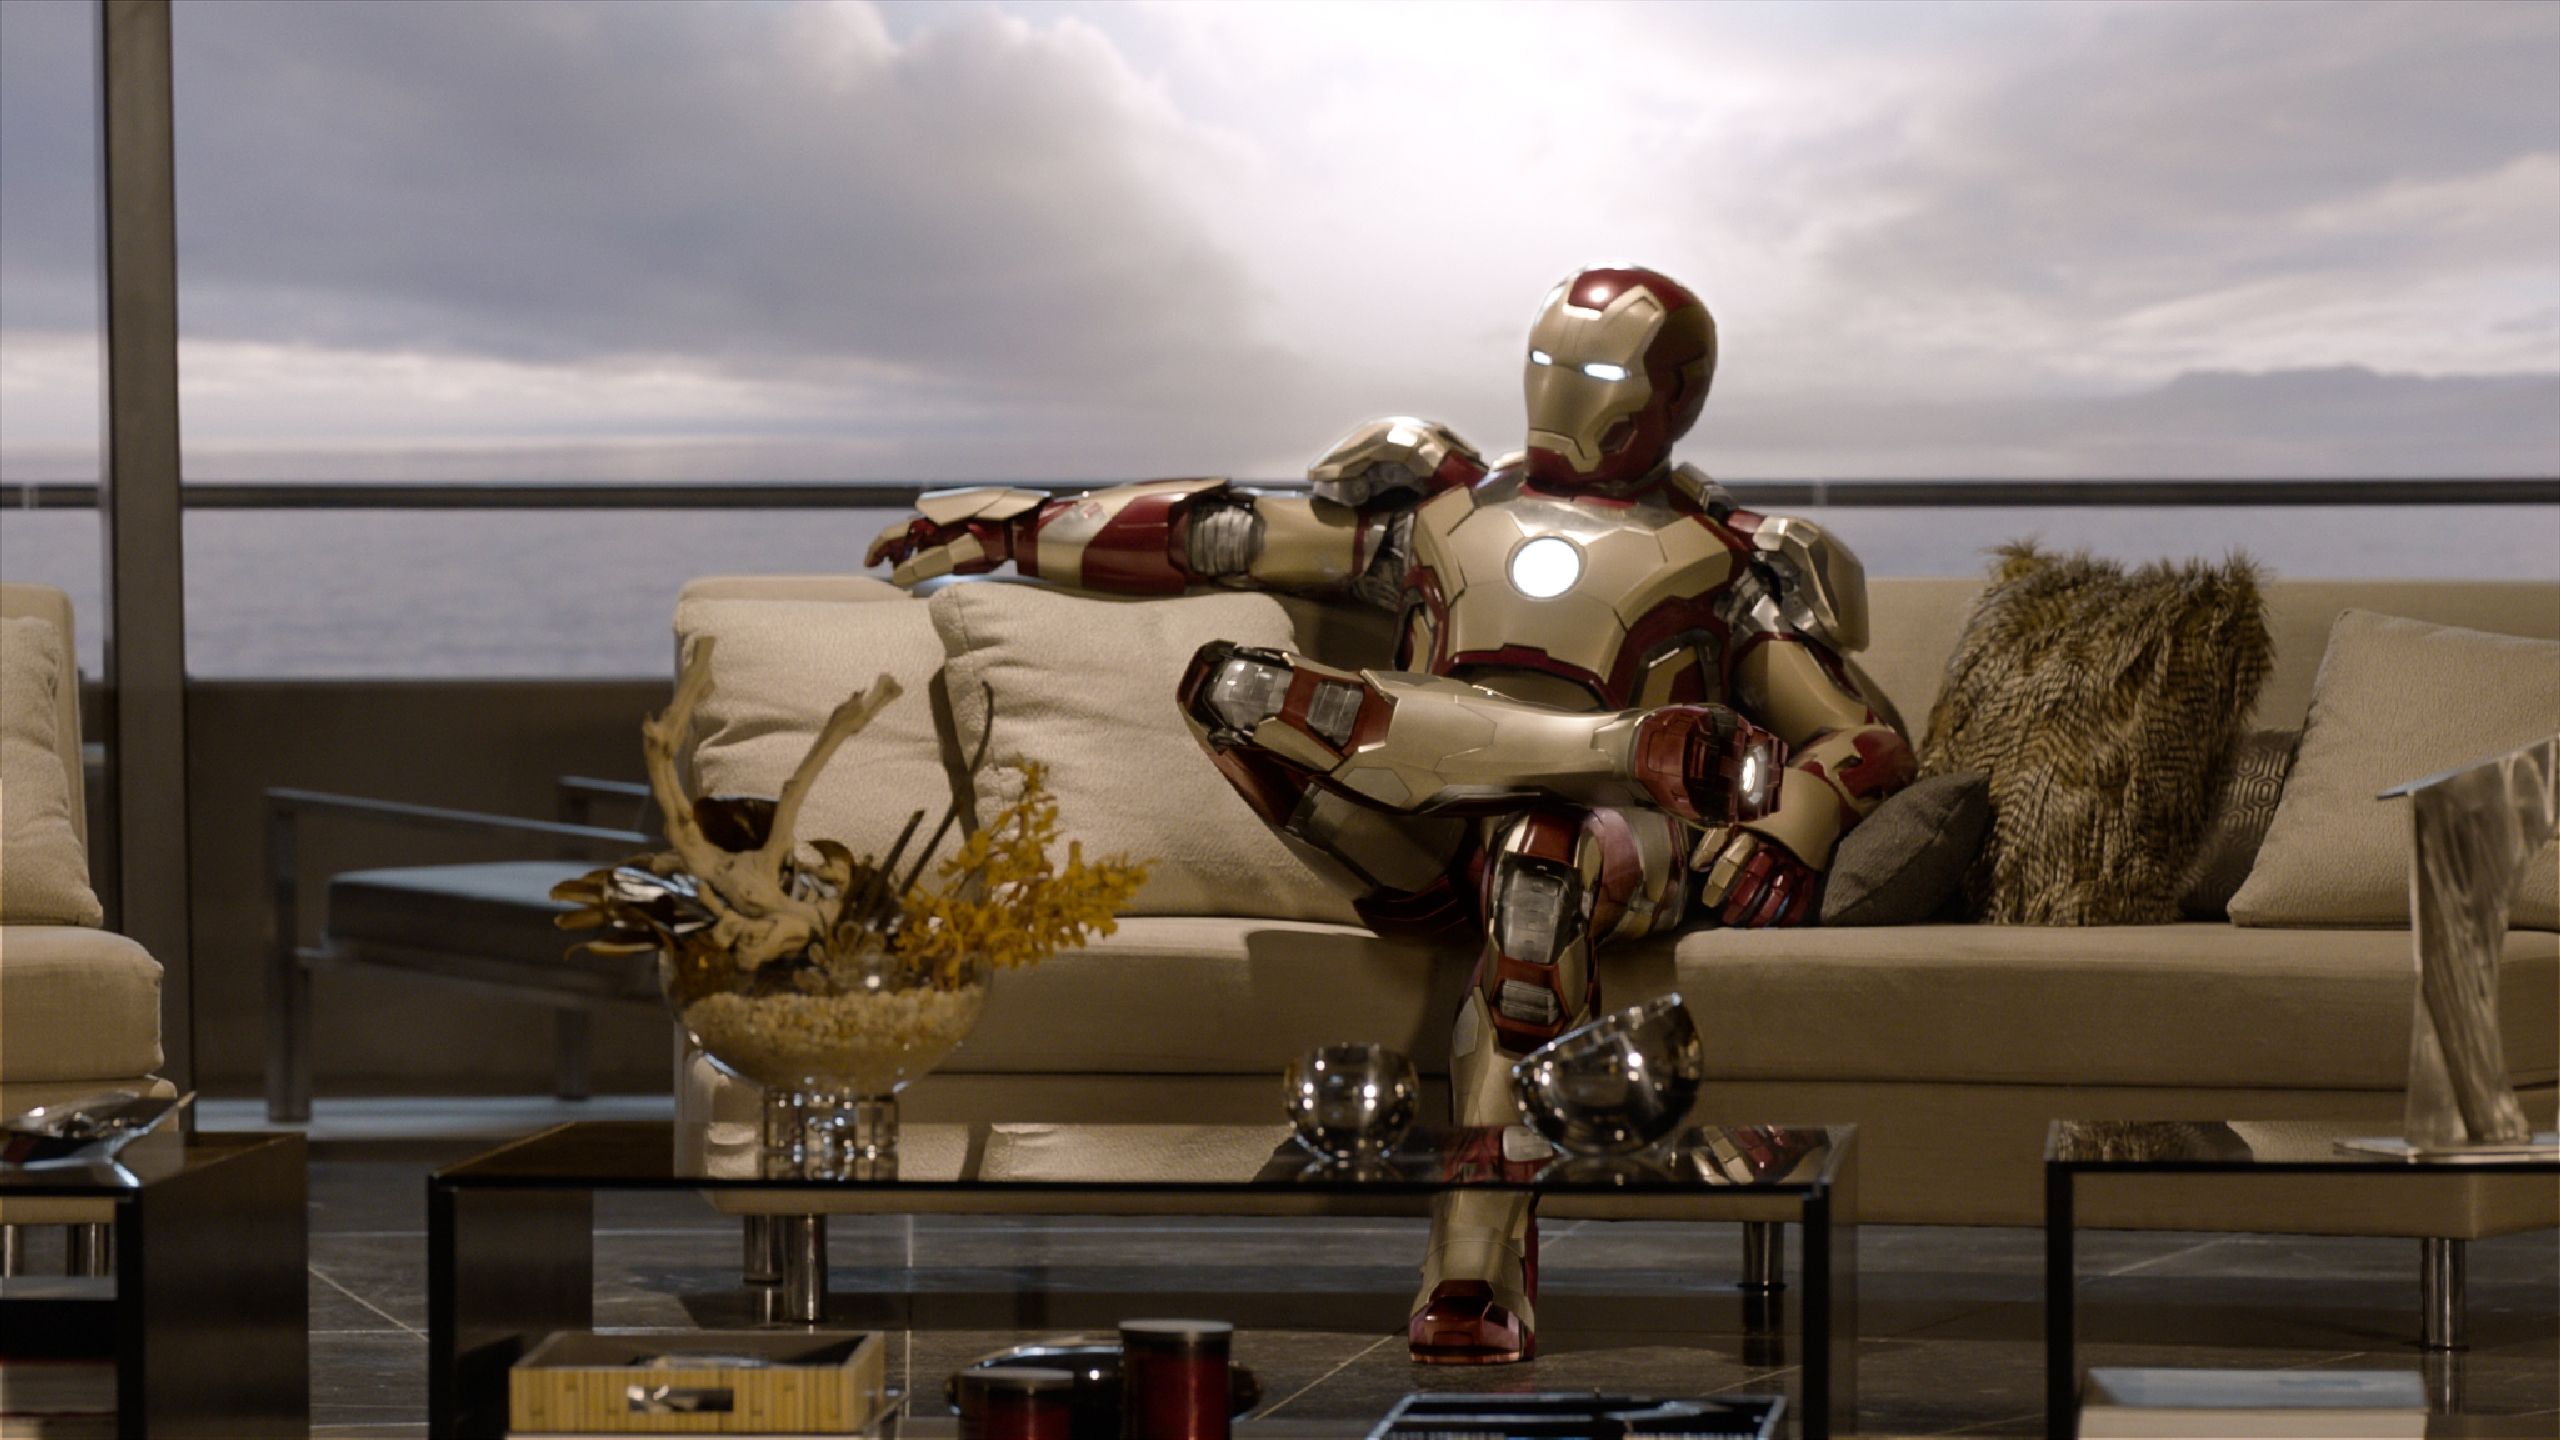 147 Iron Man HD Wallpapers | Backgrounds - Wallpaper Abyss